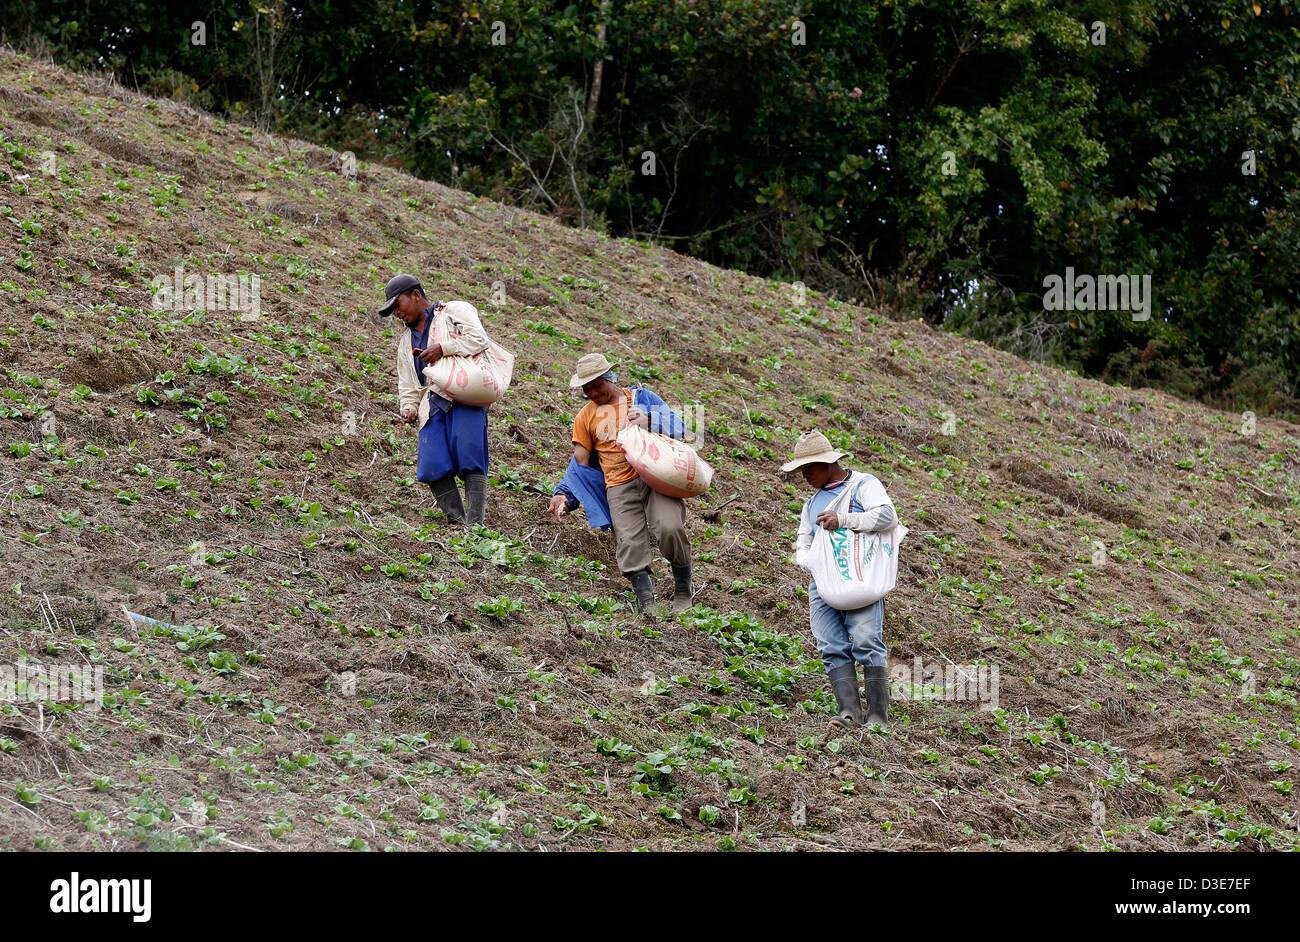 Workers spreading fertilizer by hand on a steep cultivated hillside, Guadalupe, Panama Stock Photo